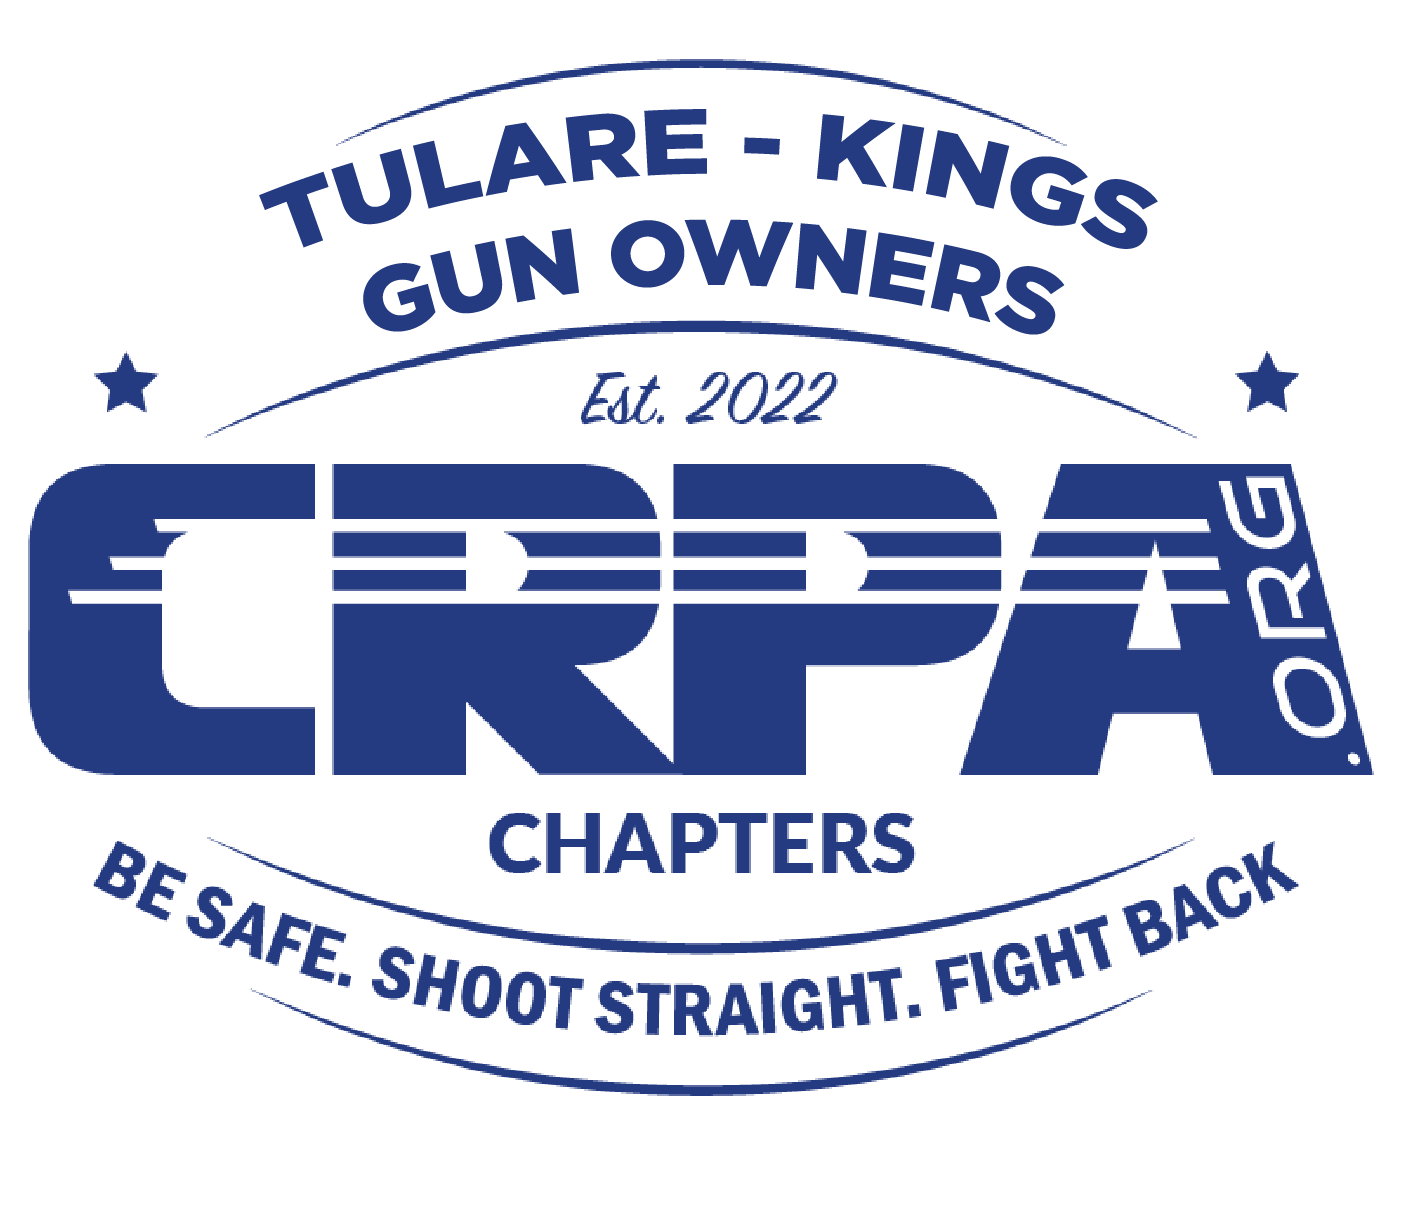 Tulare Kings Gun Owners: A CRPA Chapter